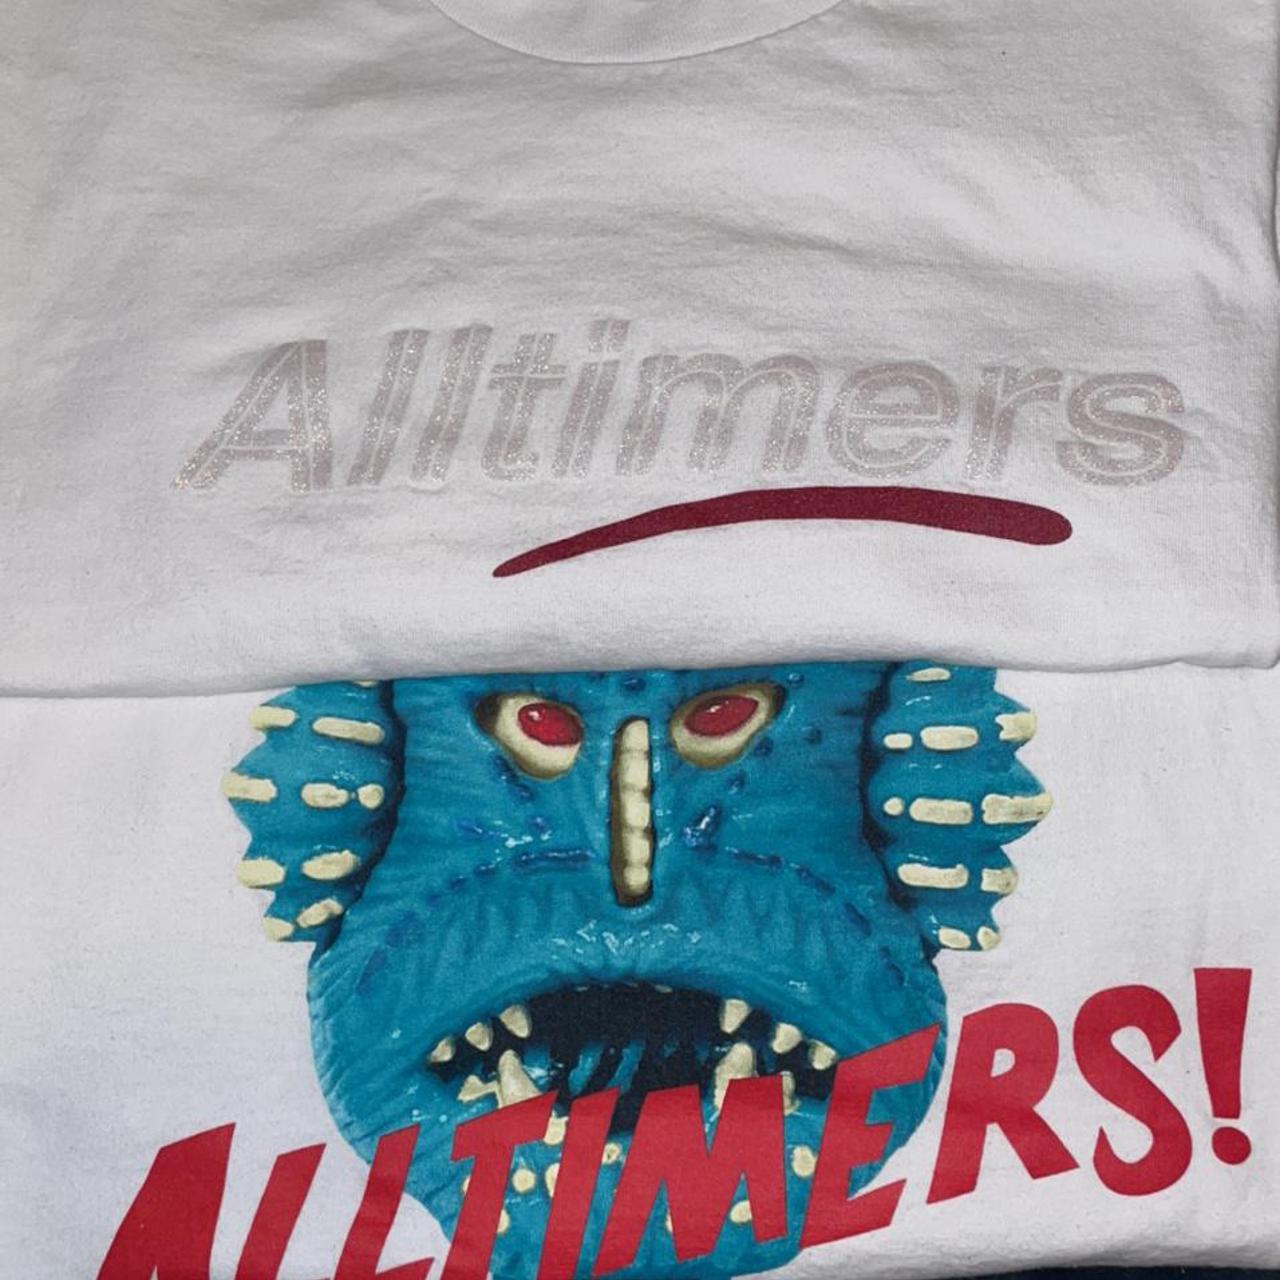 Product Image 1 - -Alltimers tee bundle 
-Both XL
-Condition